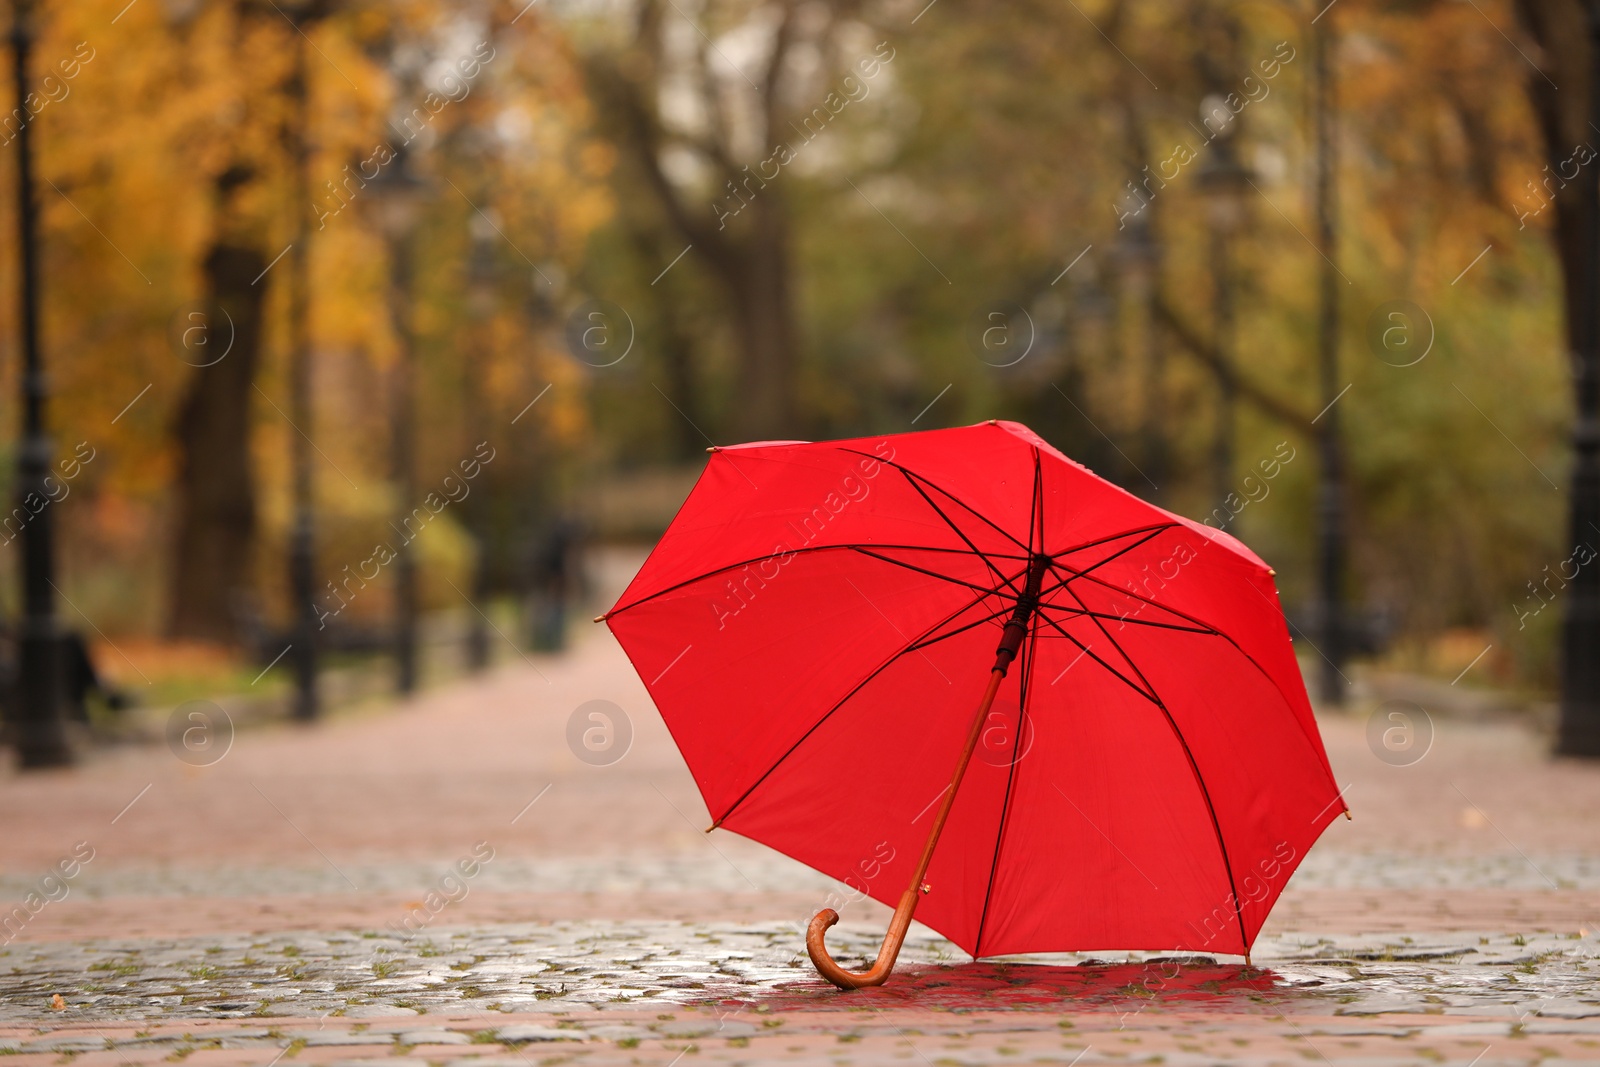 Photo of Open red umbrella on paved pathway in autumn park, space for text